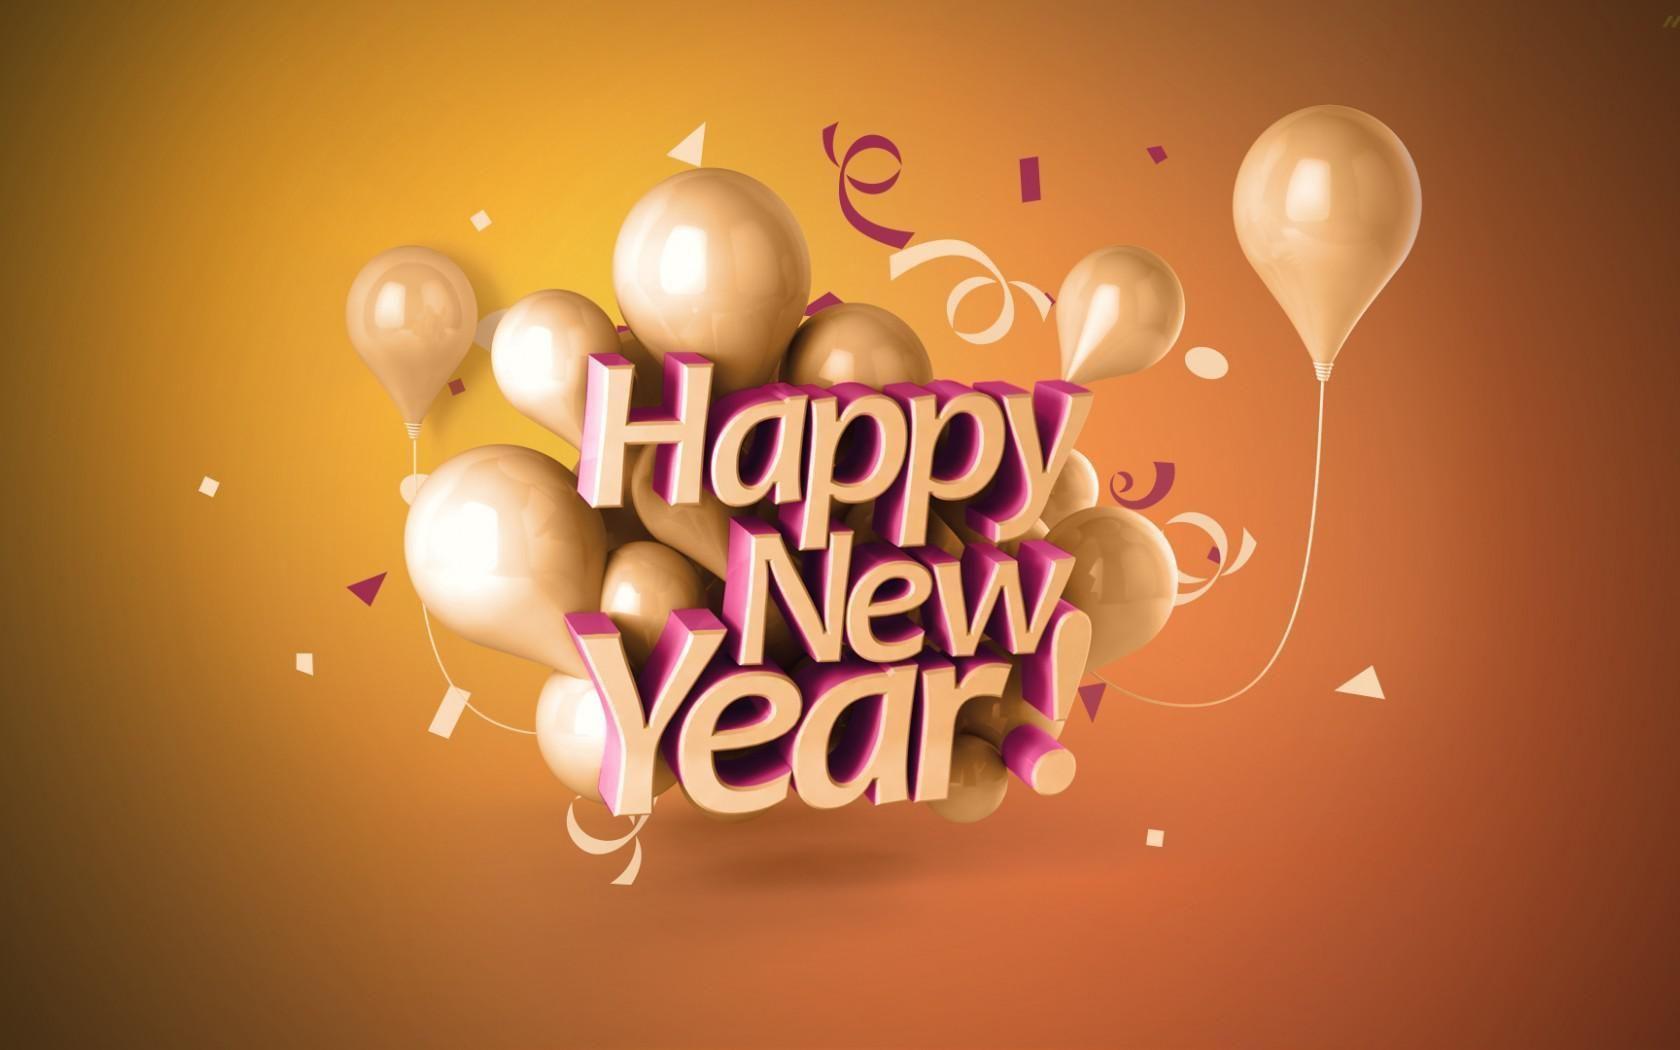 Happy New Year 2016 Wishes HD wallpaper